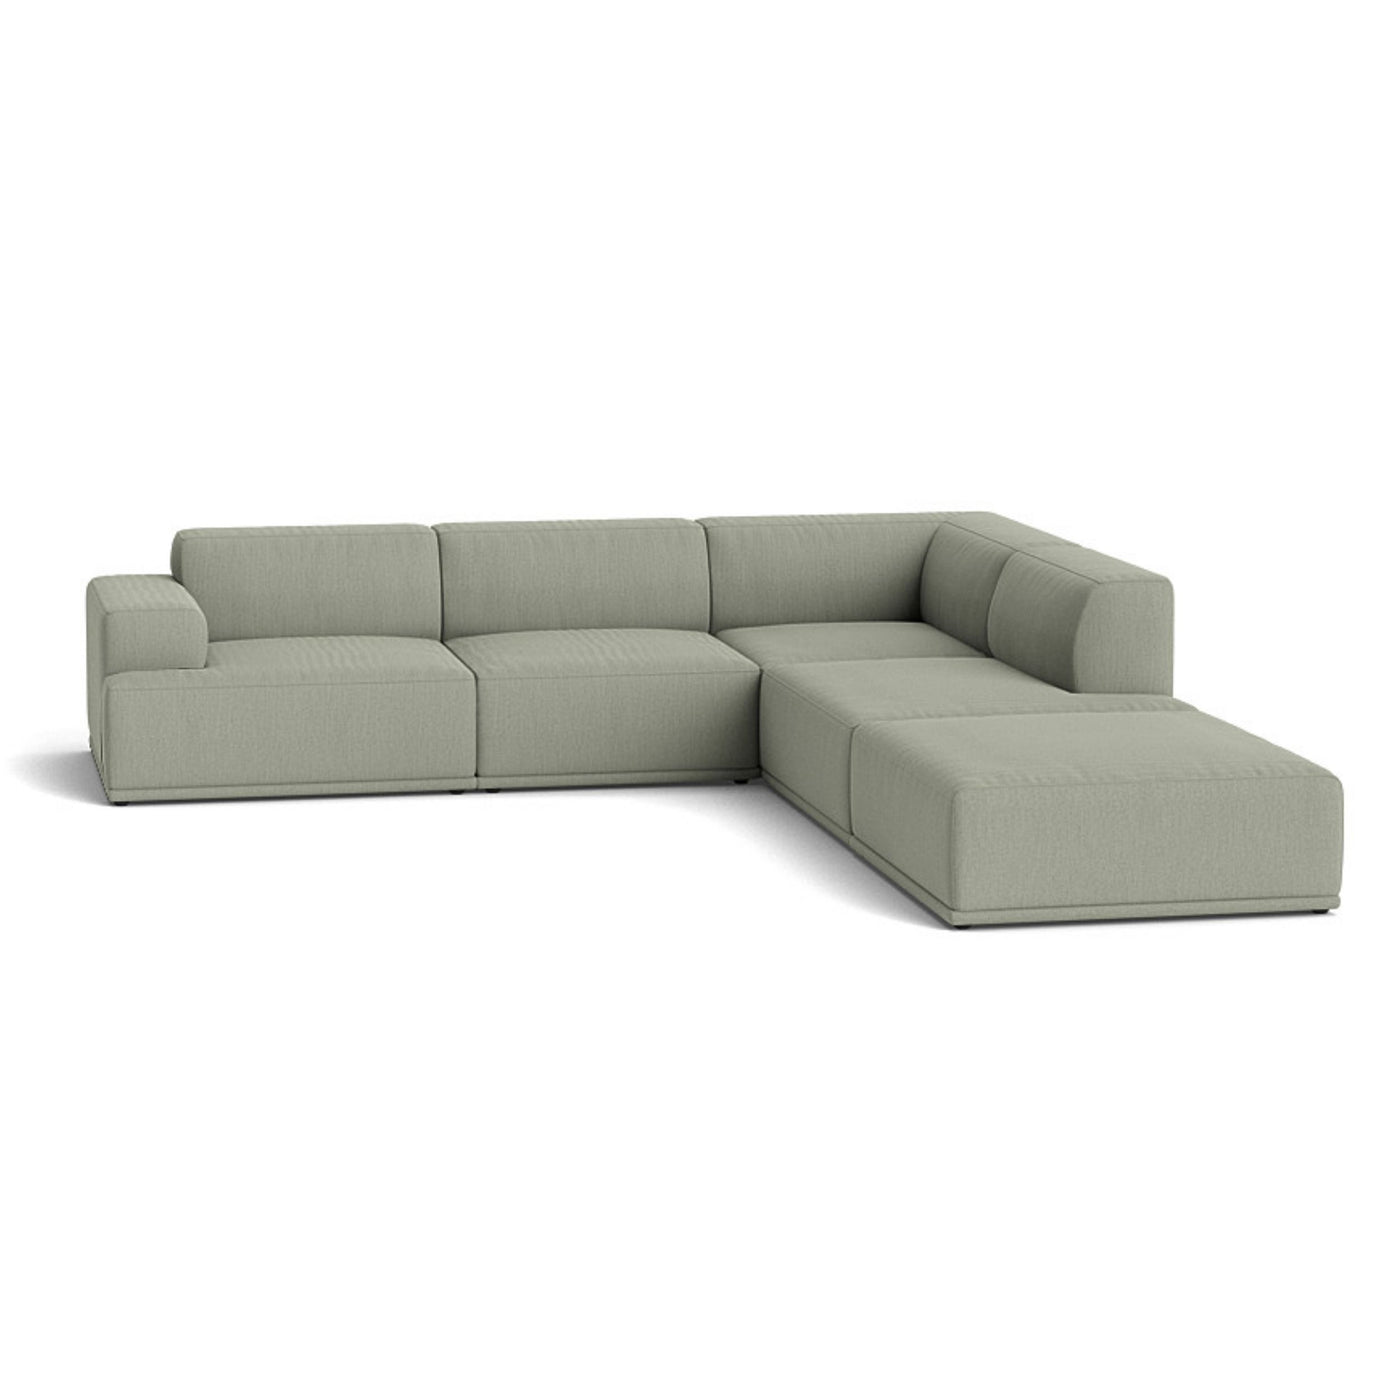 Muuto Connect Soft Modular Corner Sofa, configuration 2. Made-to-order from someday designs. #colour_re-wool-408